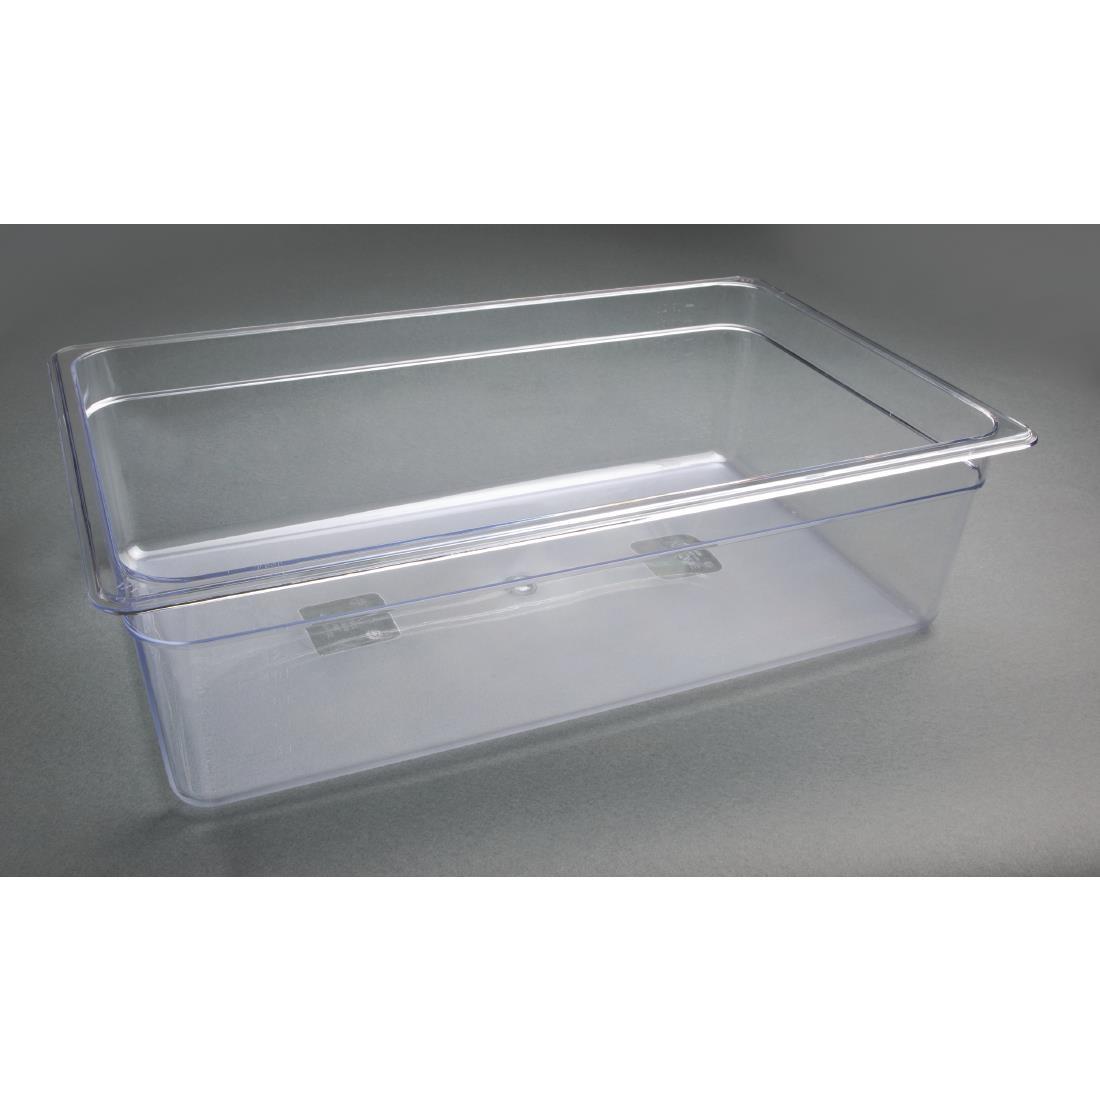 Vogue Polycarbonate 1/1 Gastronorm Container 150mm Clear - U226  - 6